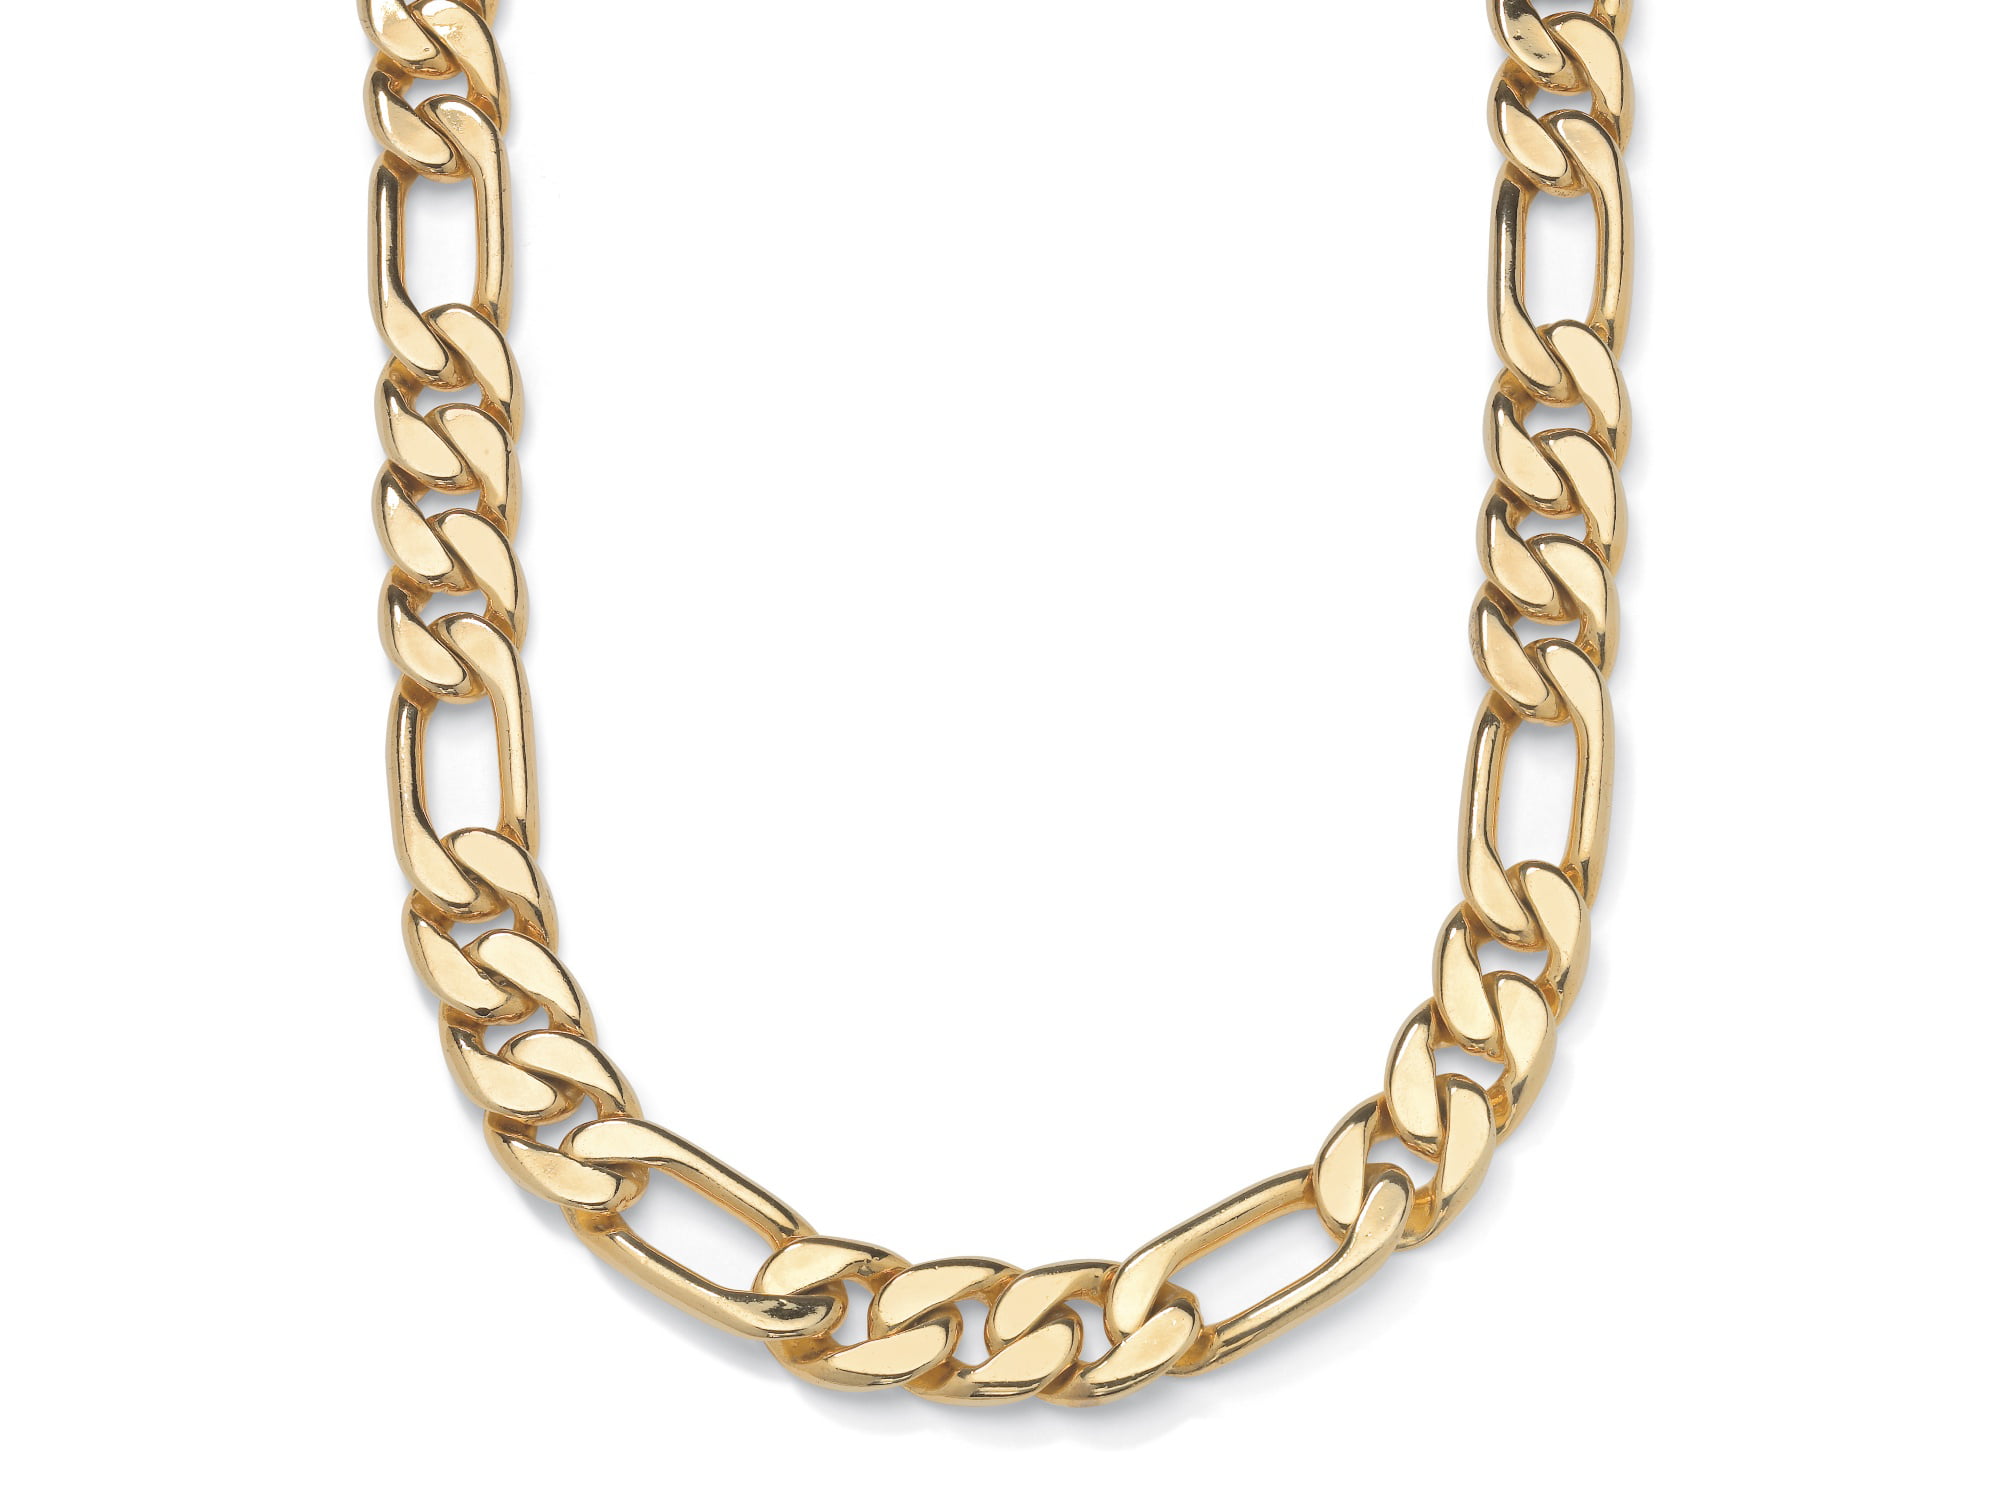 14K Yellow Gold Filled Solid Figaro Chain Bracelet, 4.0 mm, 8.5 